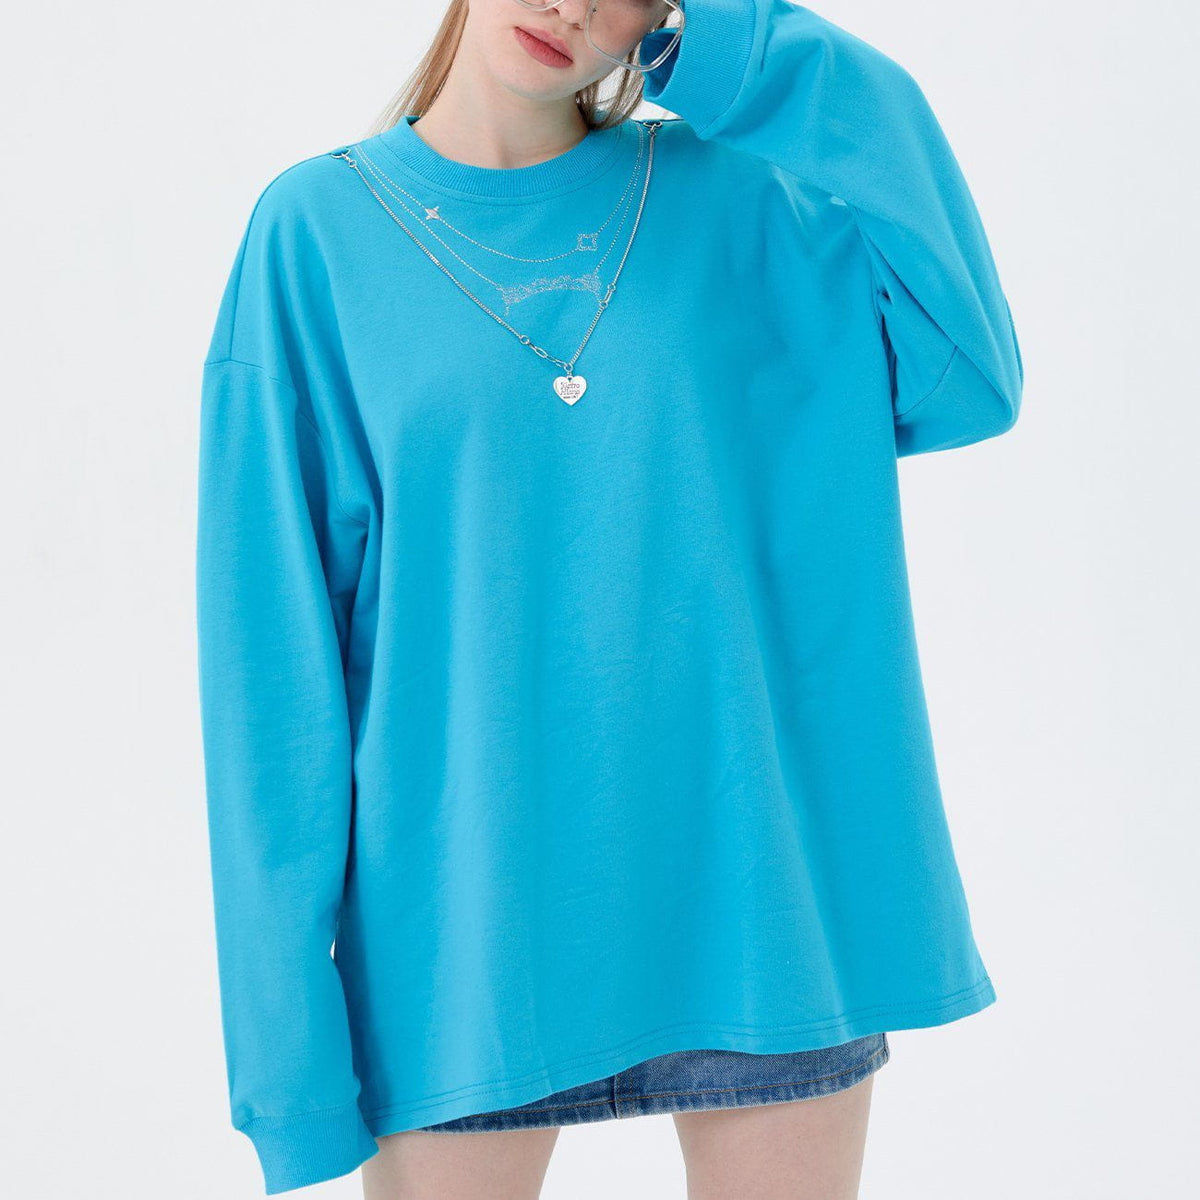 Eprezzy® - Solid Color Love Letter Necklace Long Sleeves Streetwear Fashion - eprezzy.com